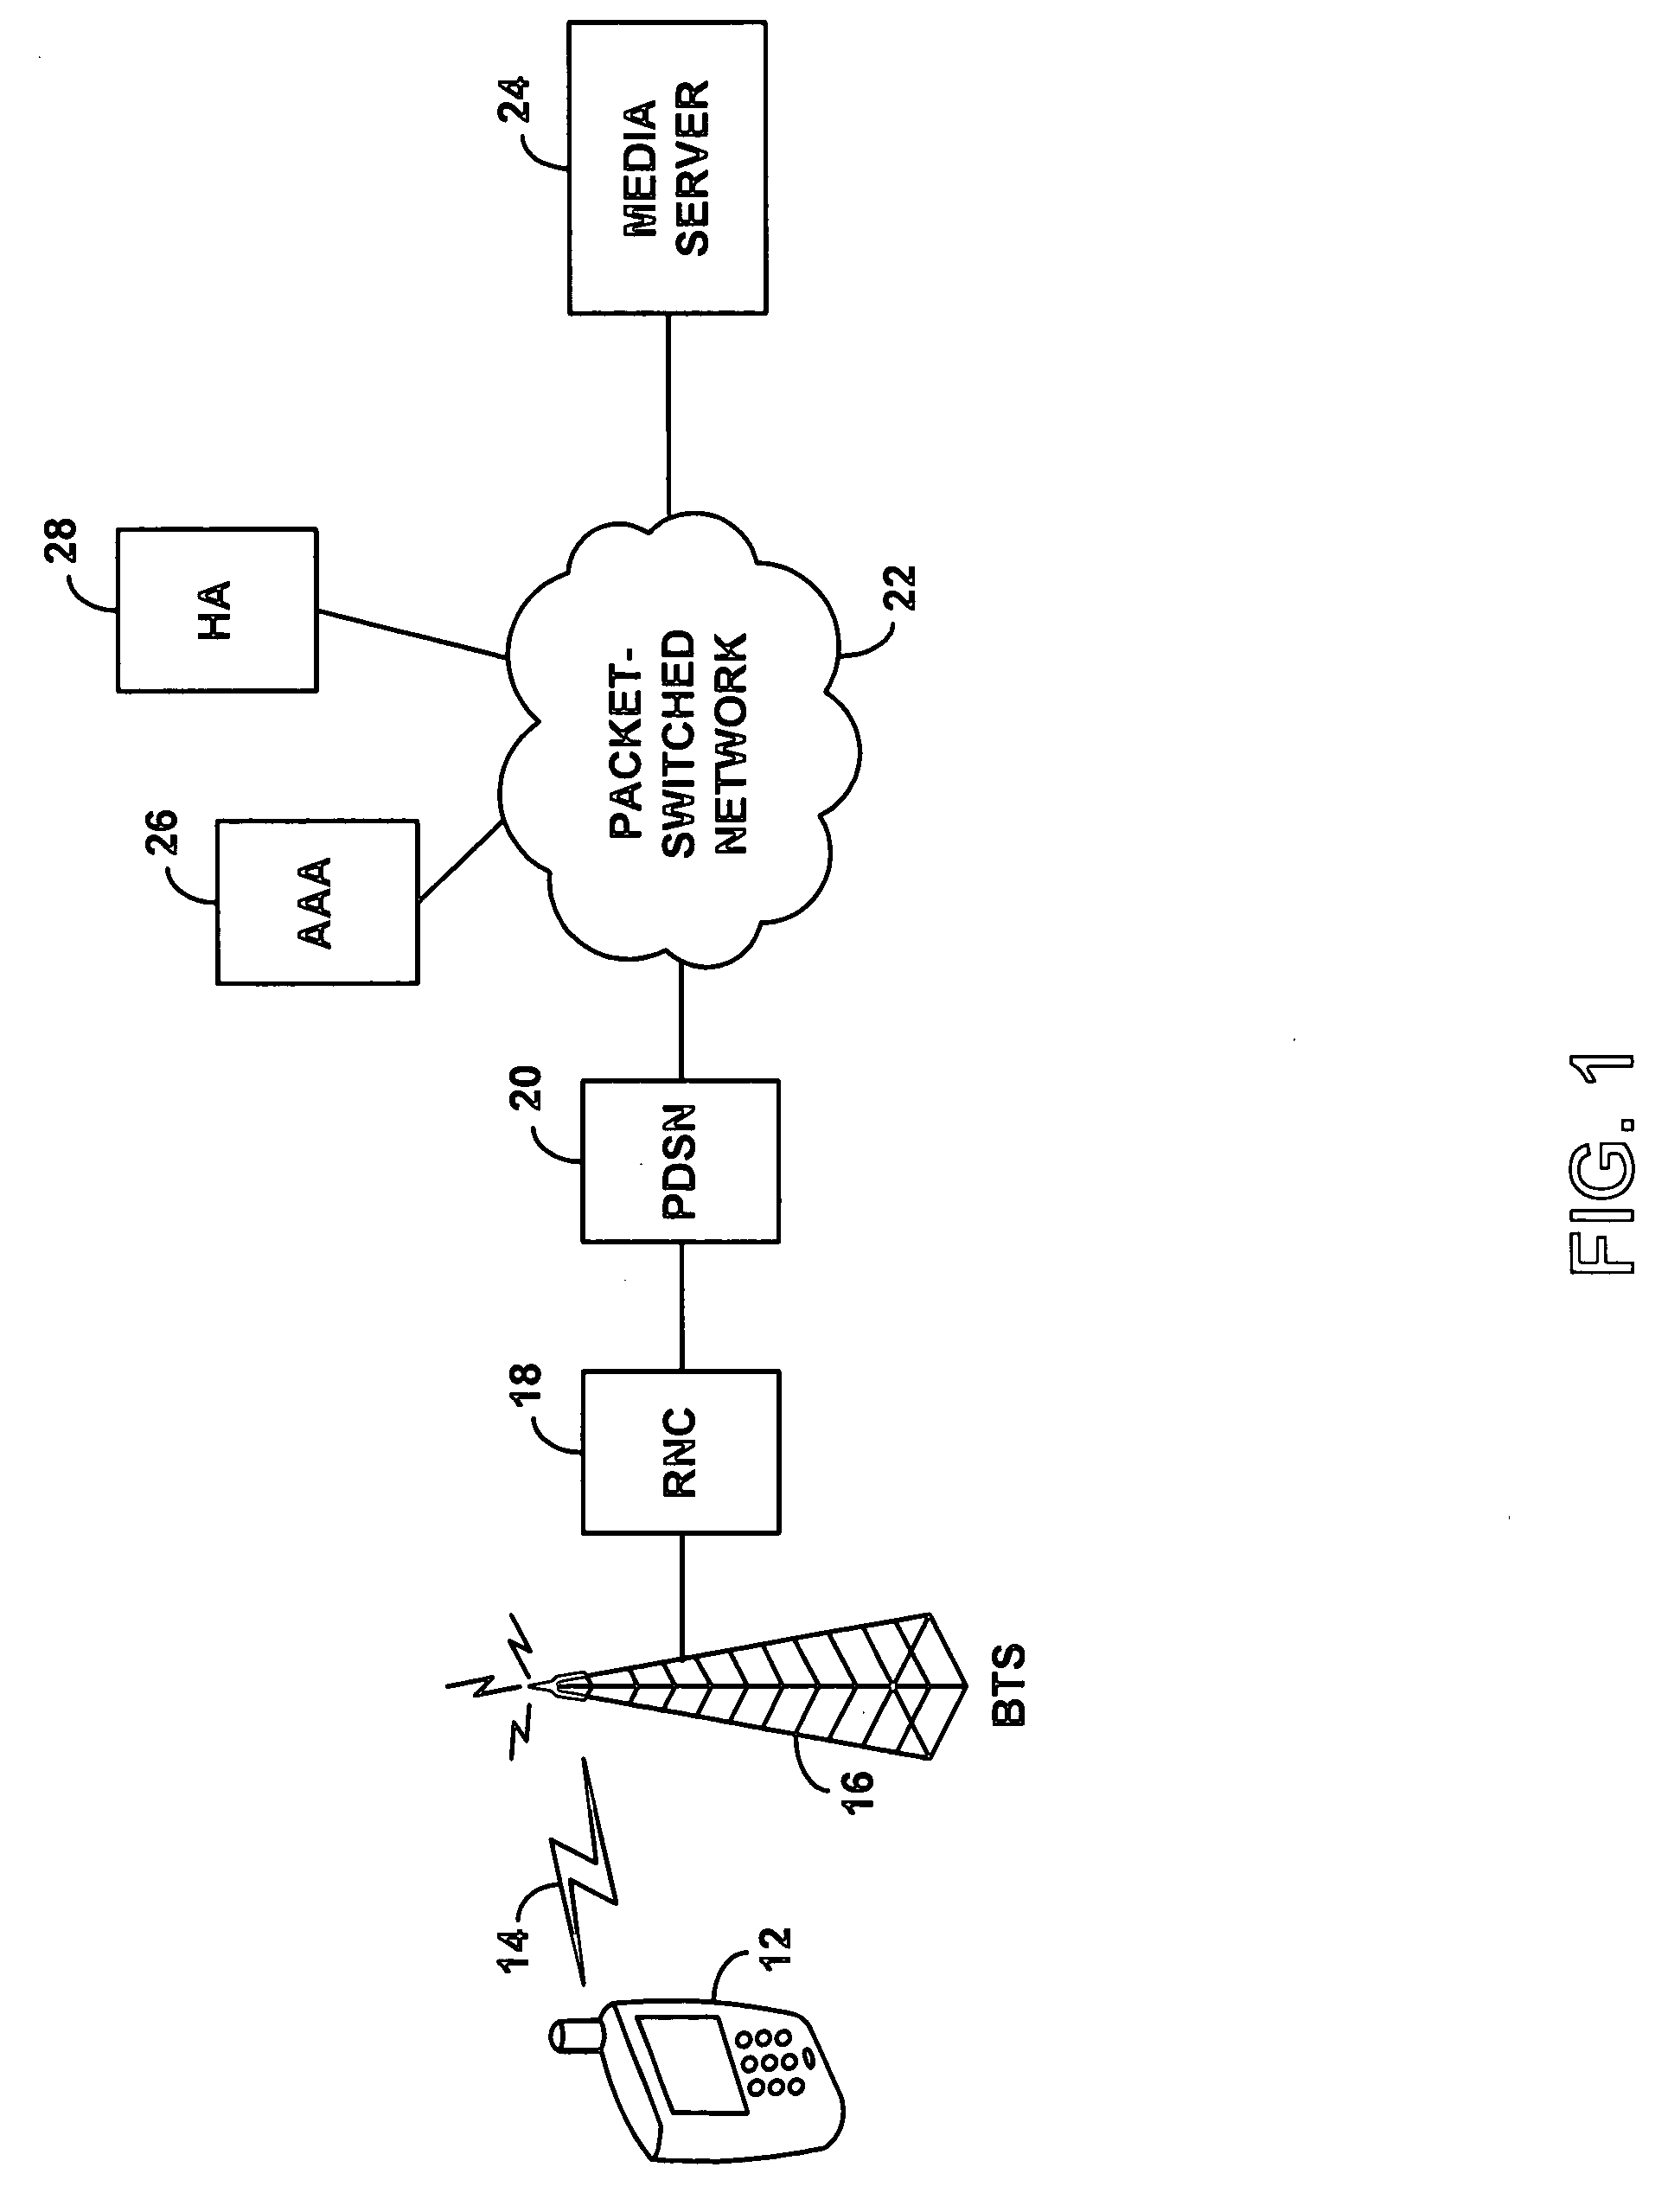 Method and system for controlling streaming of media to wireless communication devices